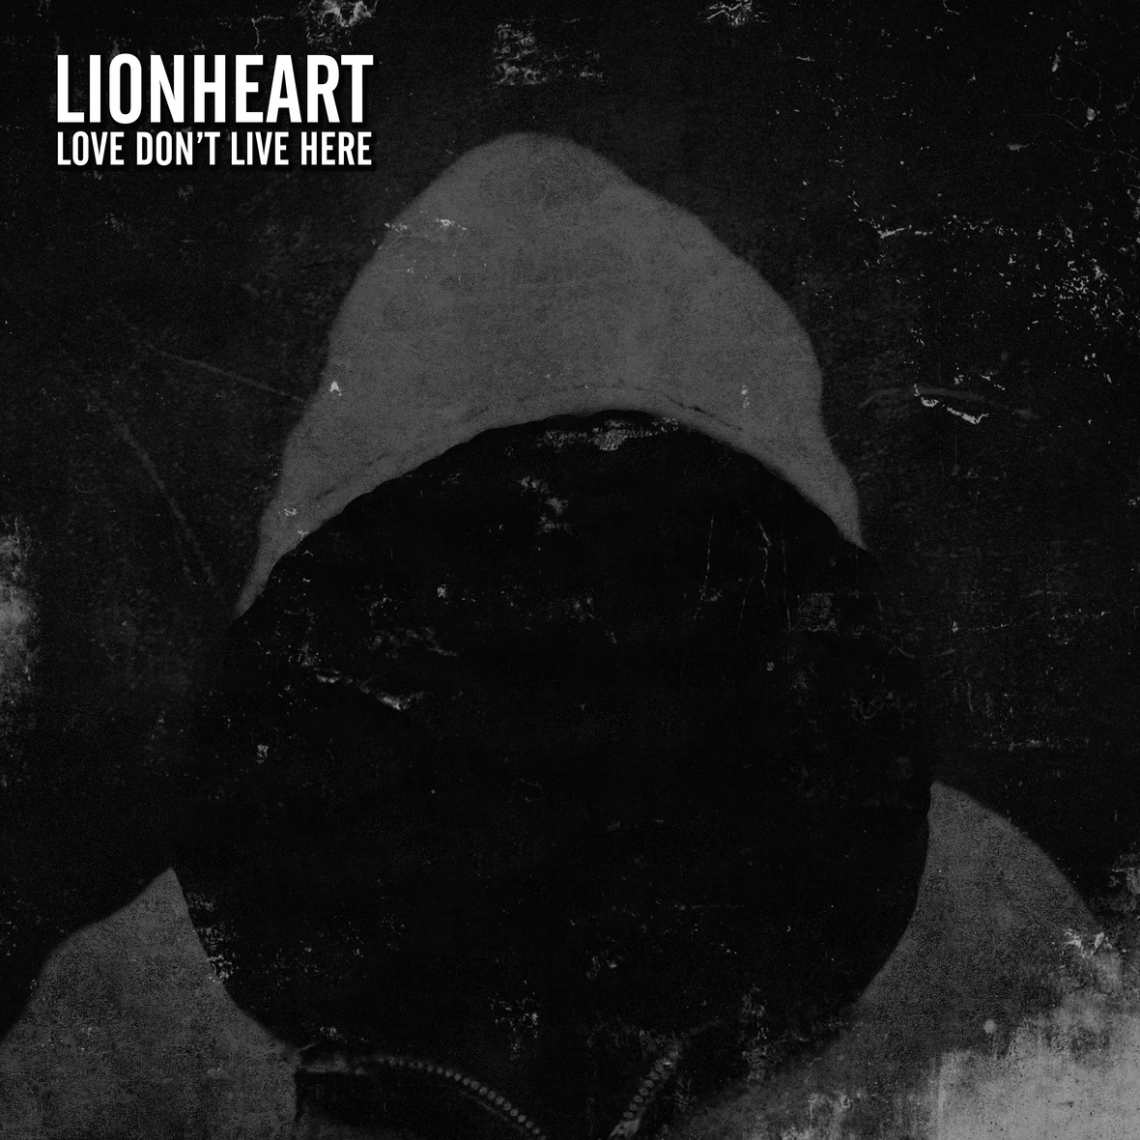 Lionheart – Love Don’t Live Here – CD review